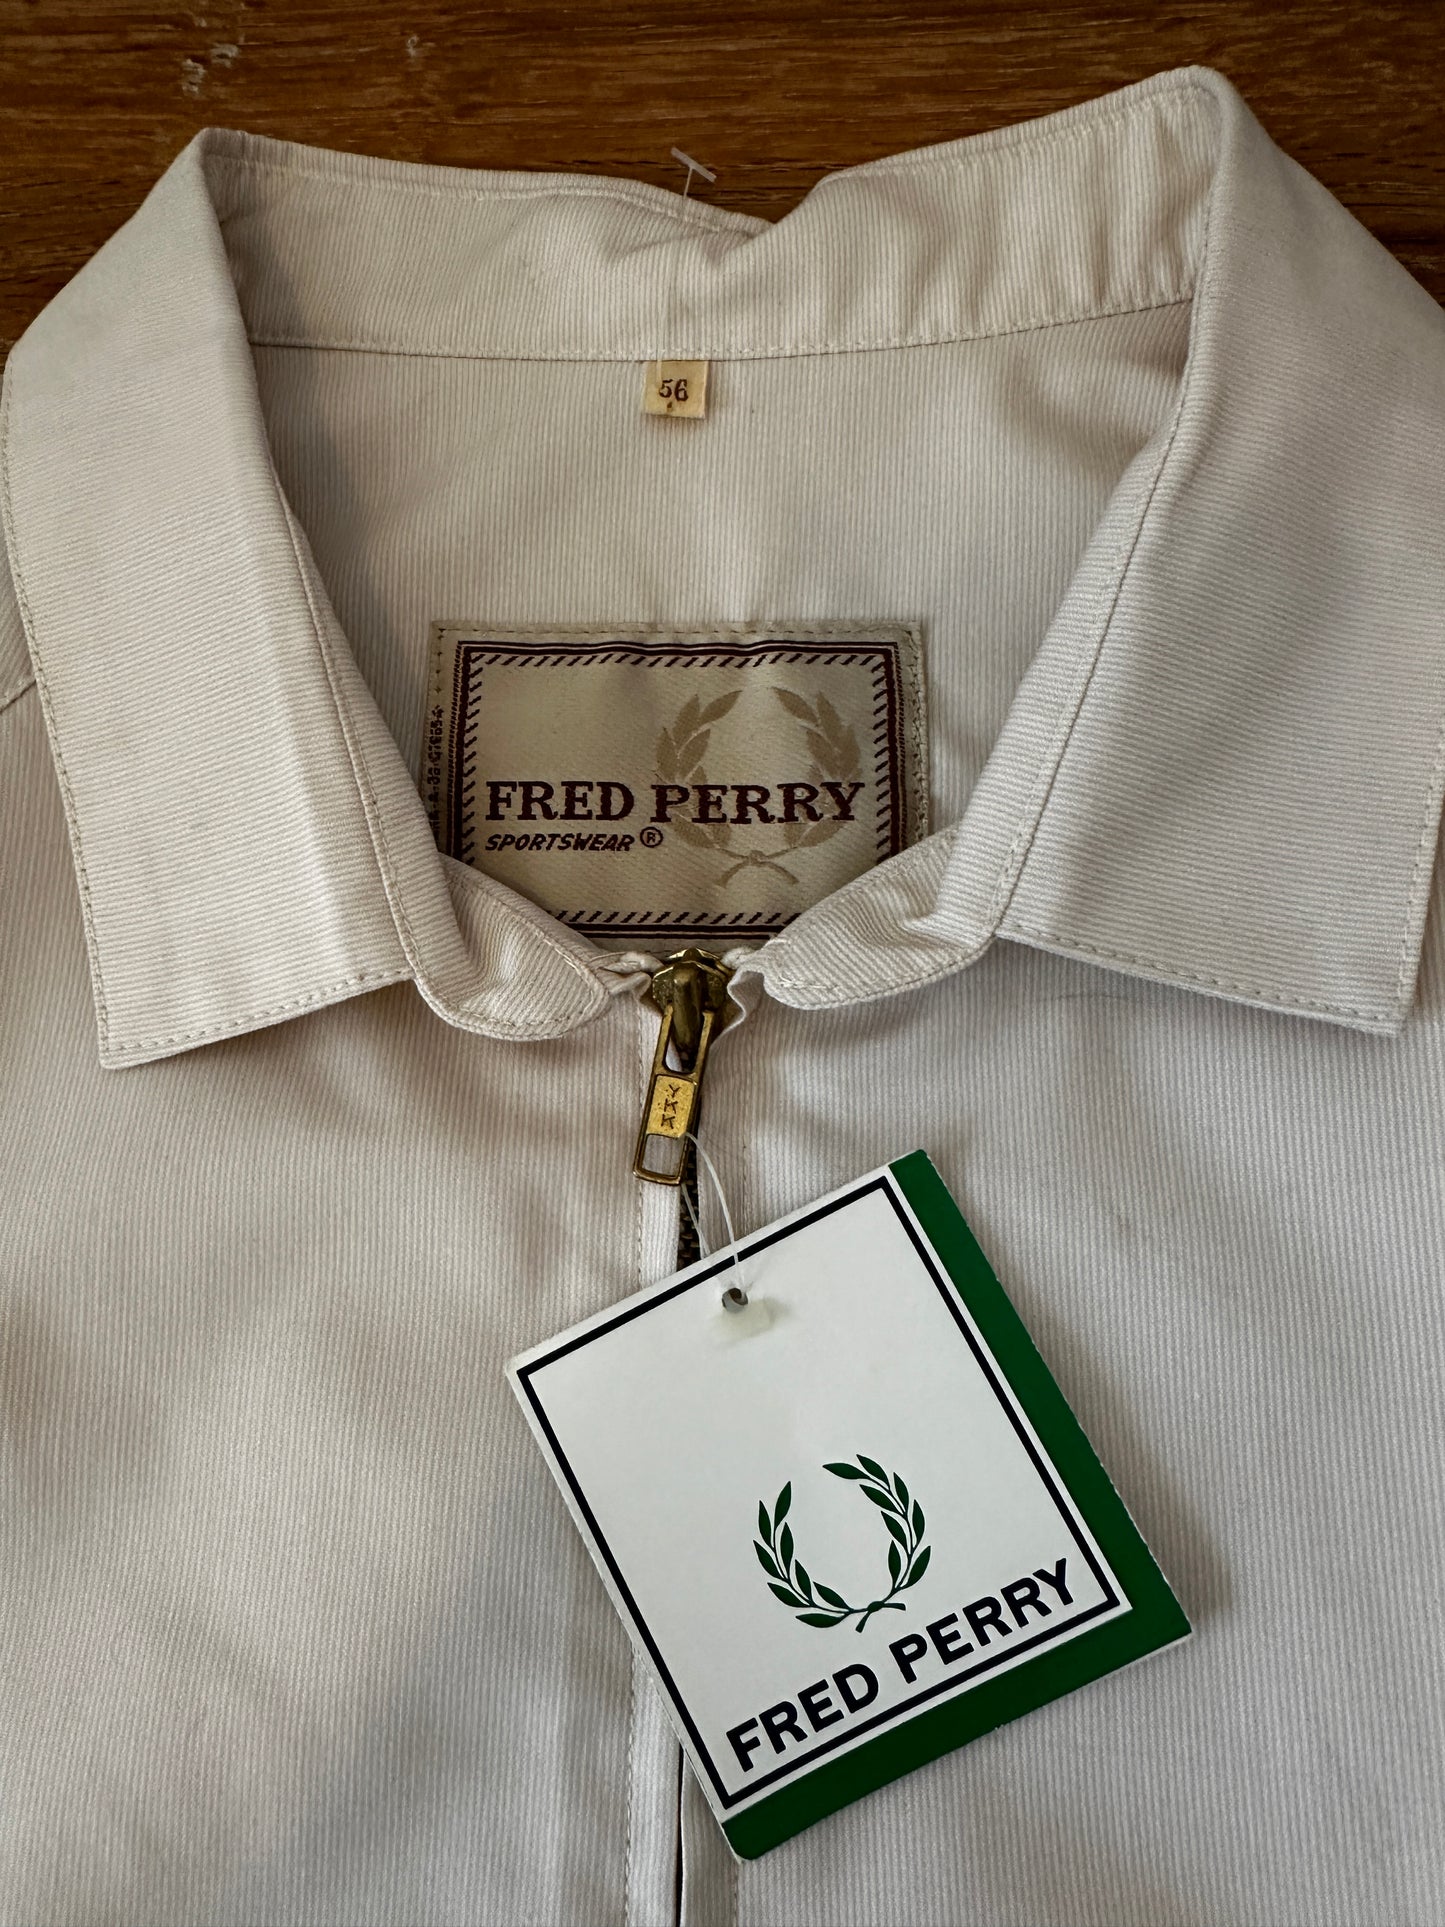 Fred Perry Vintage 80s Overshirt - Deadstock - 56 / XL - Made in Spain